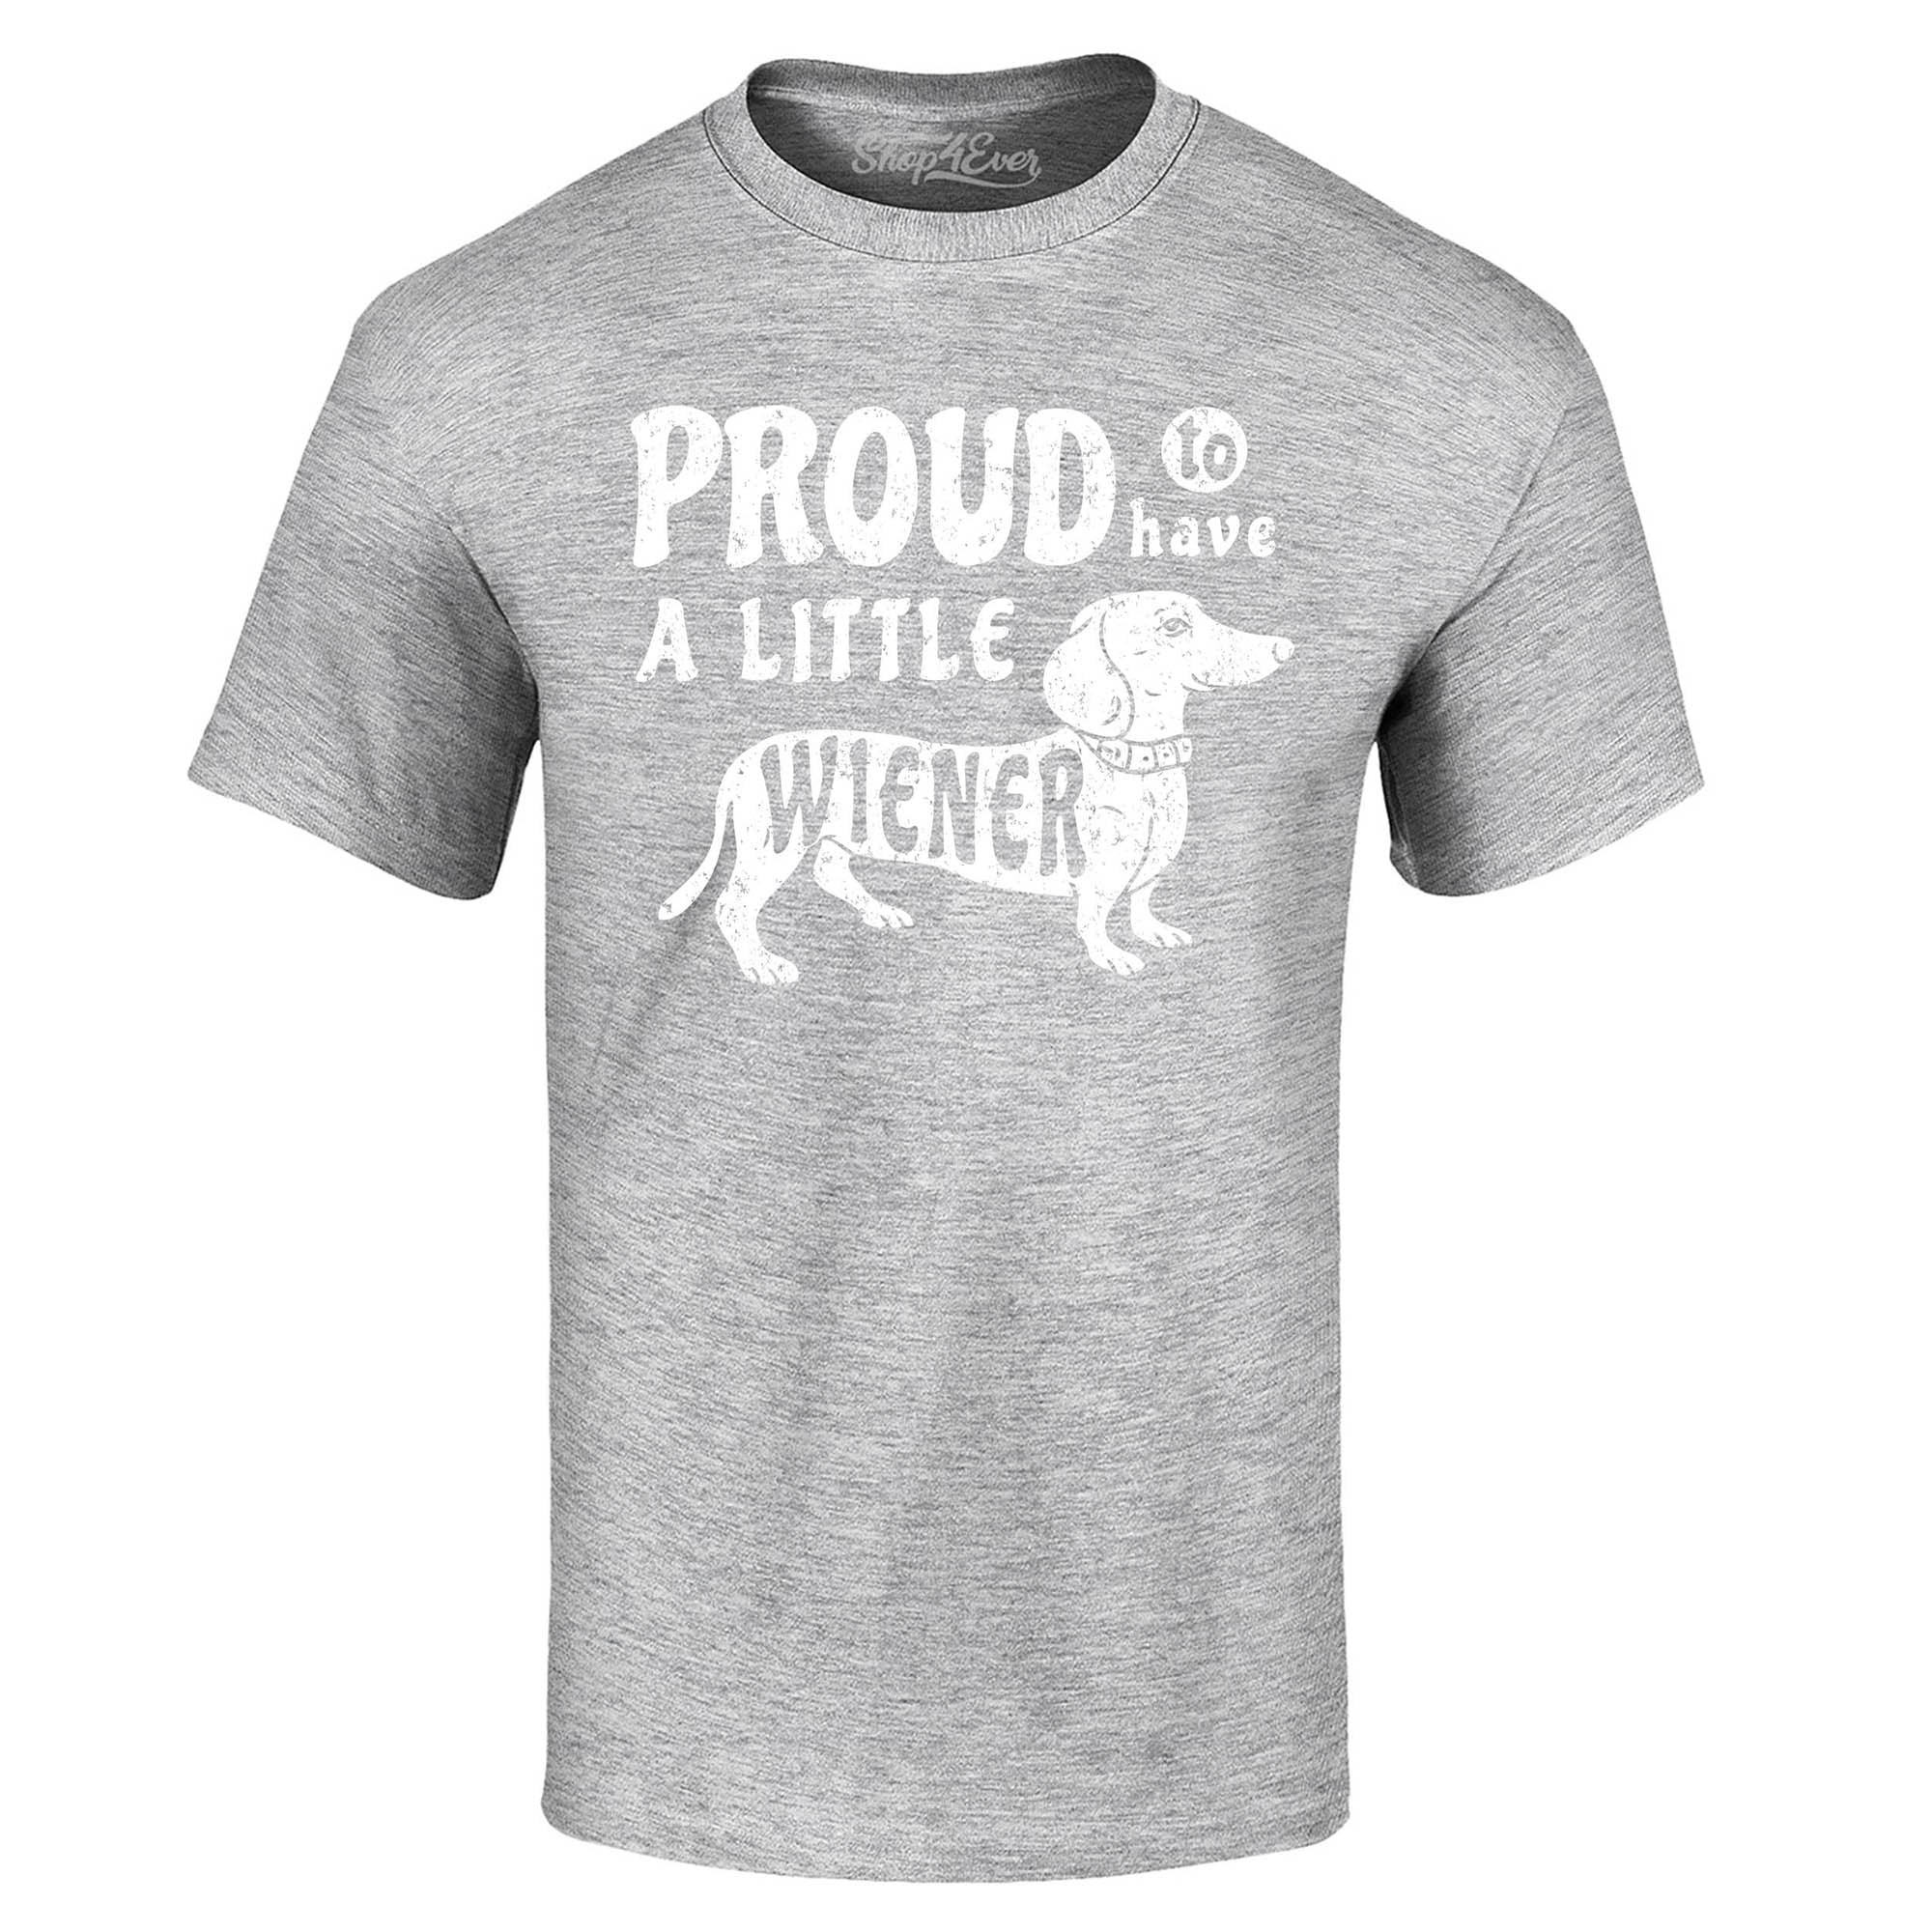 Proud to Have a Little Weiner Funny Dachshund Dog T-Shirt